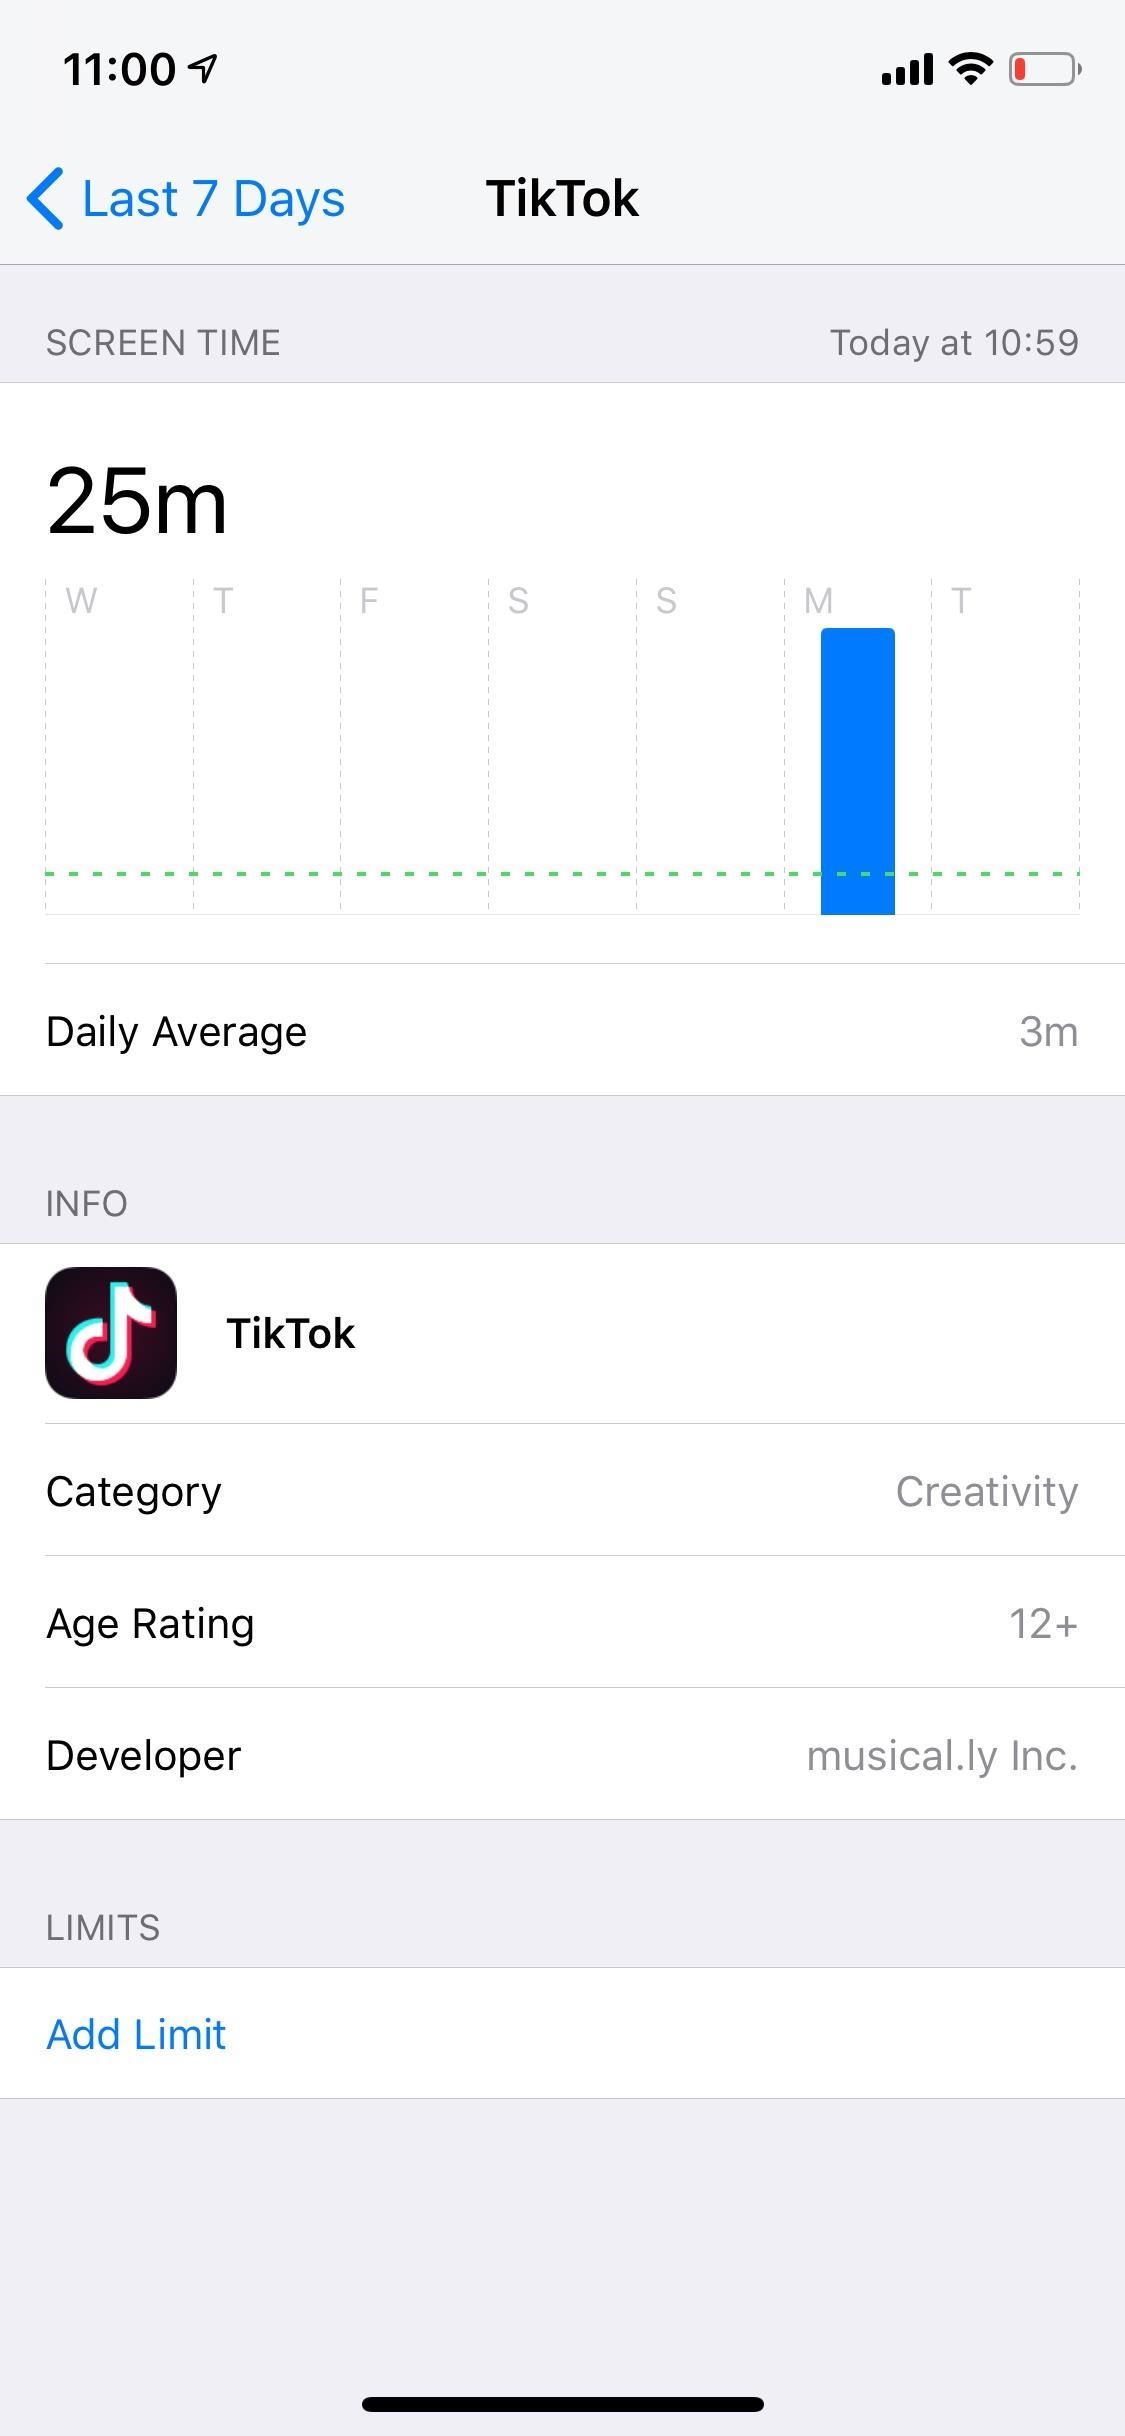 How to Limit Your Kid's TikTok Usage on Their iPhone